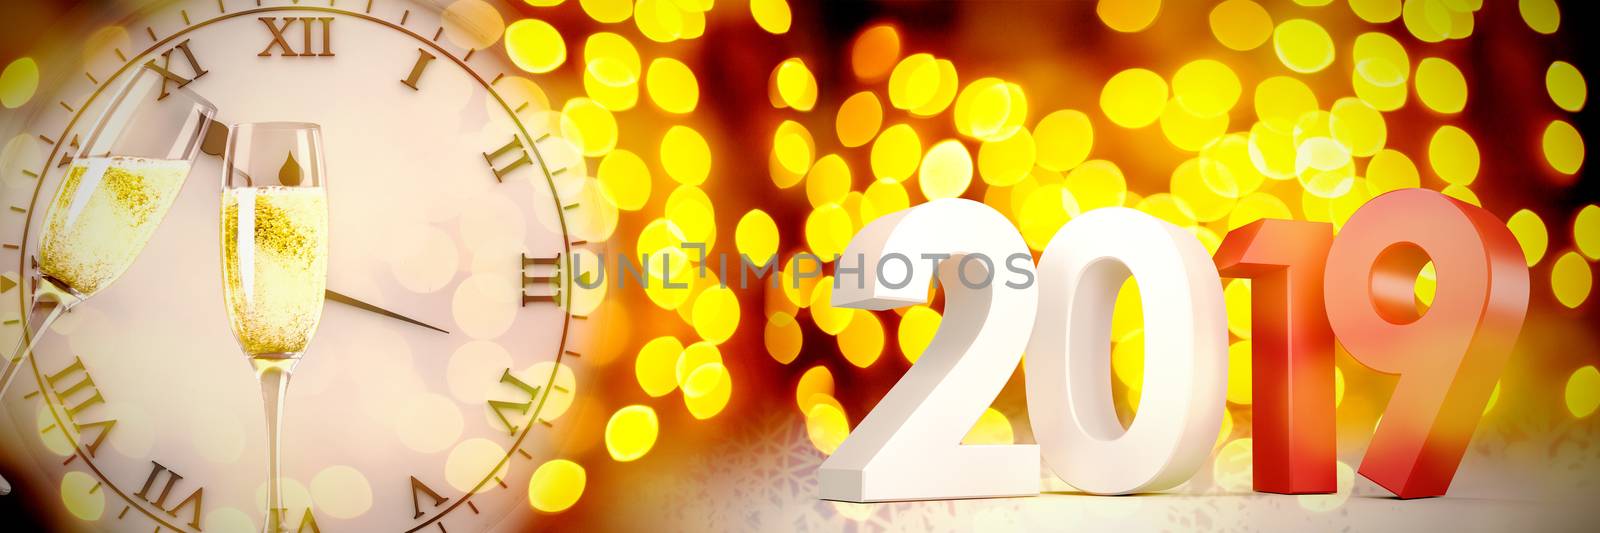 Digital image of three dimensional numbers in red and gray color against unfocused yellow christmas light